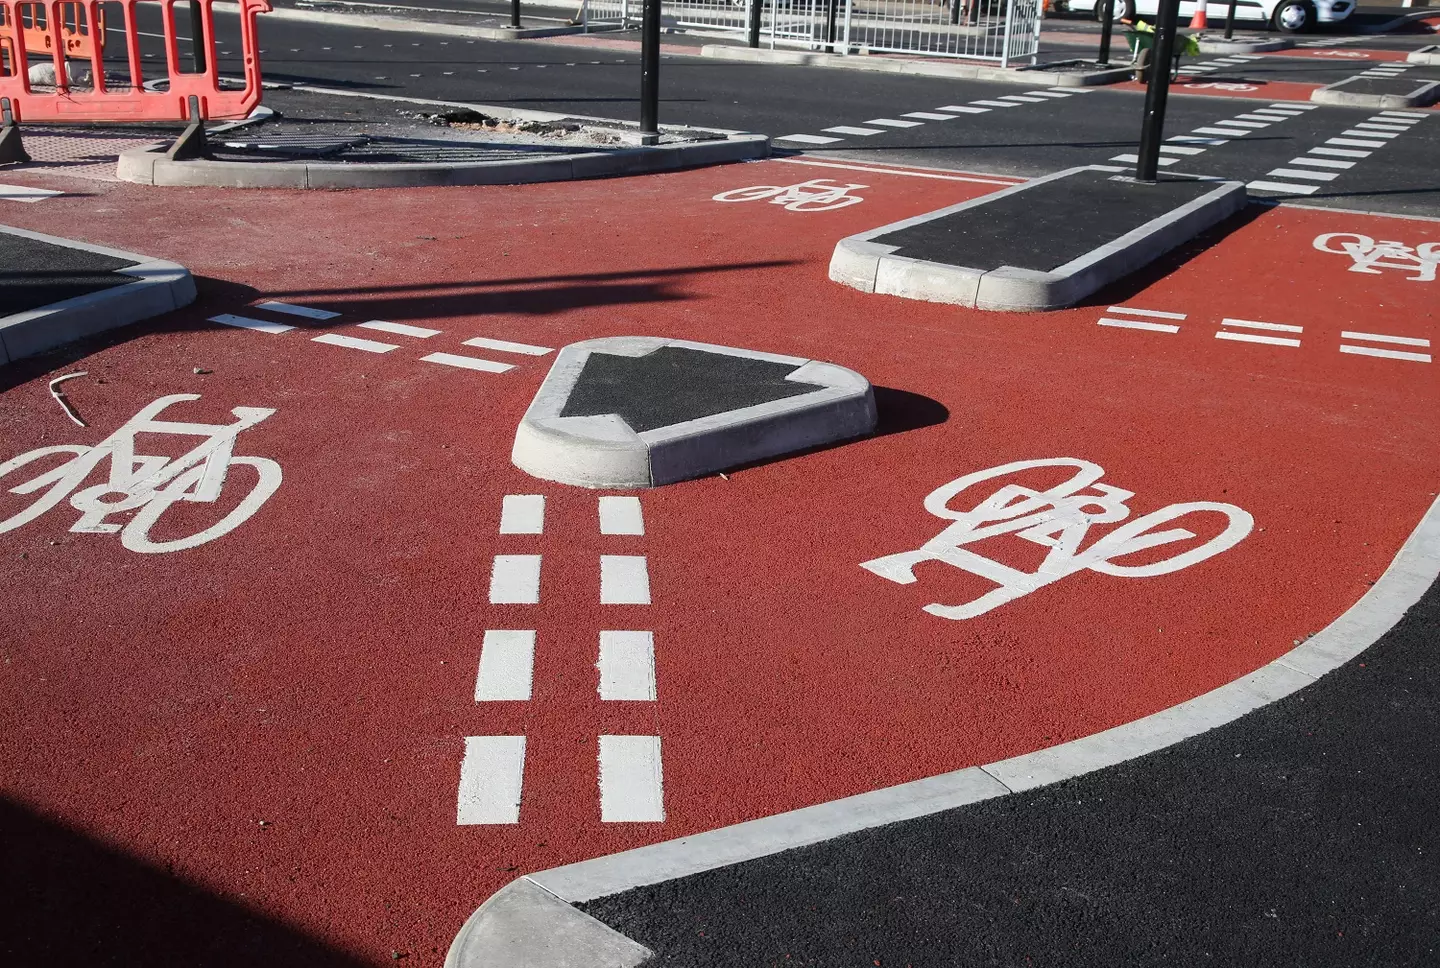 Yeah, it does look a bit confusing, but it's just a cycle lane, right?